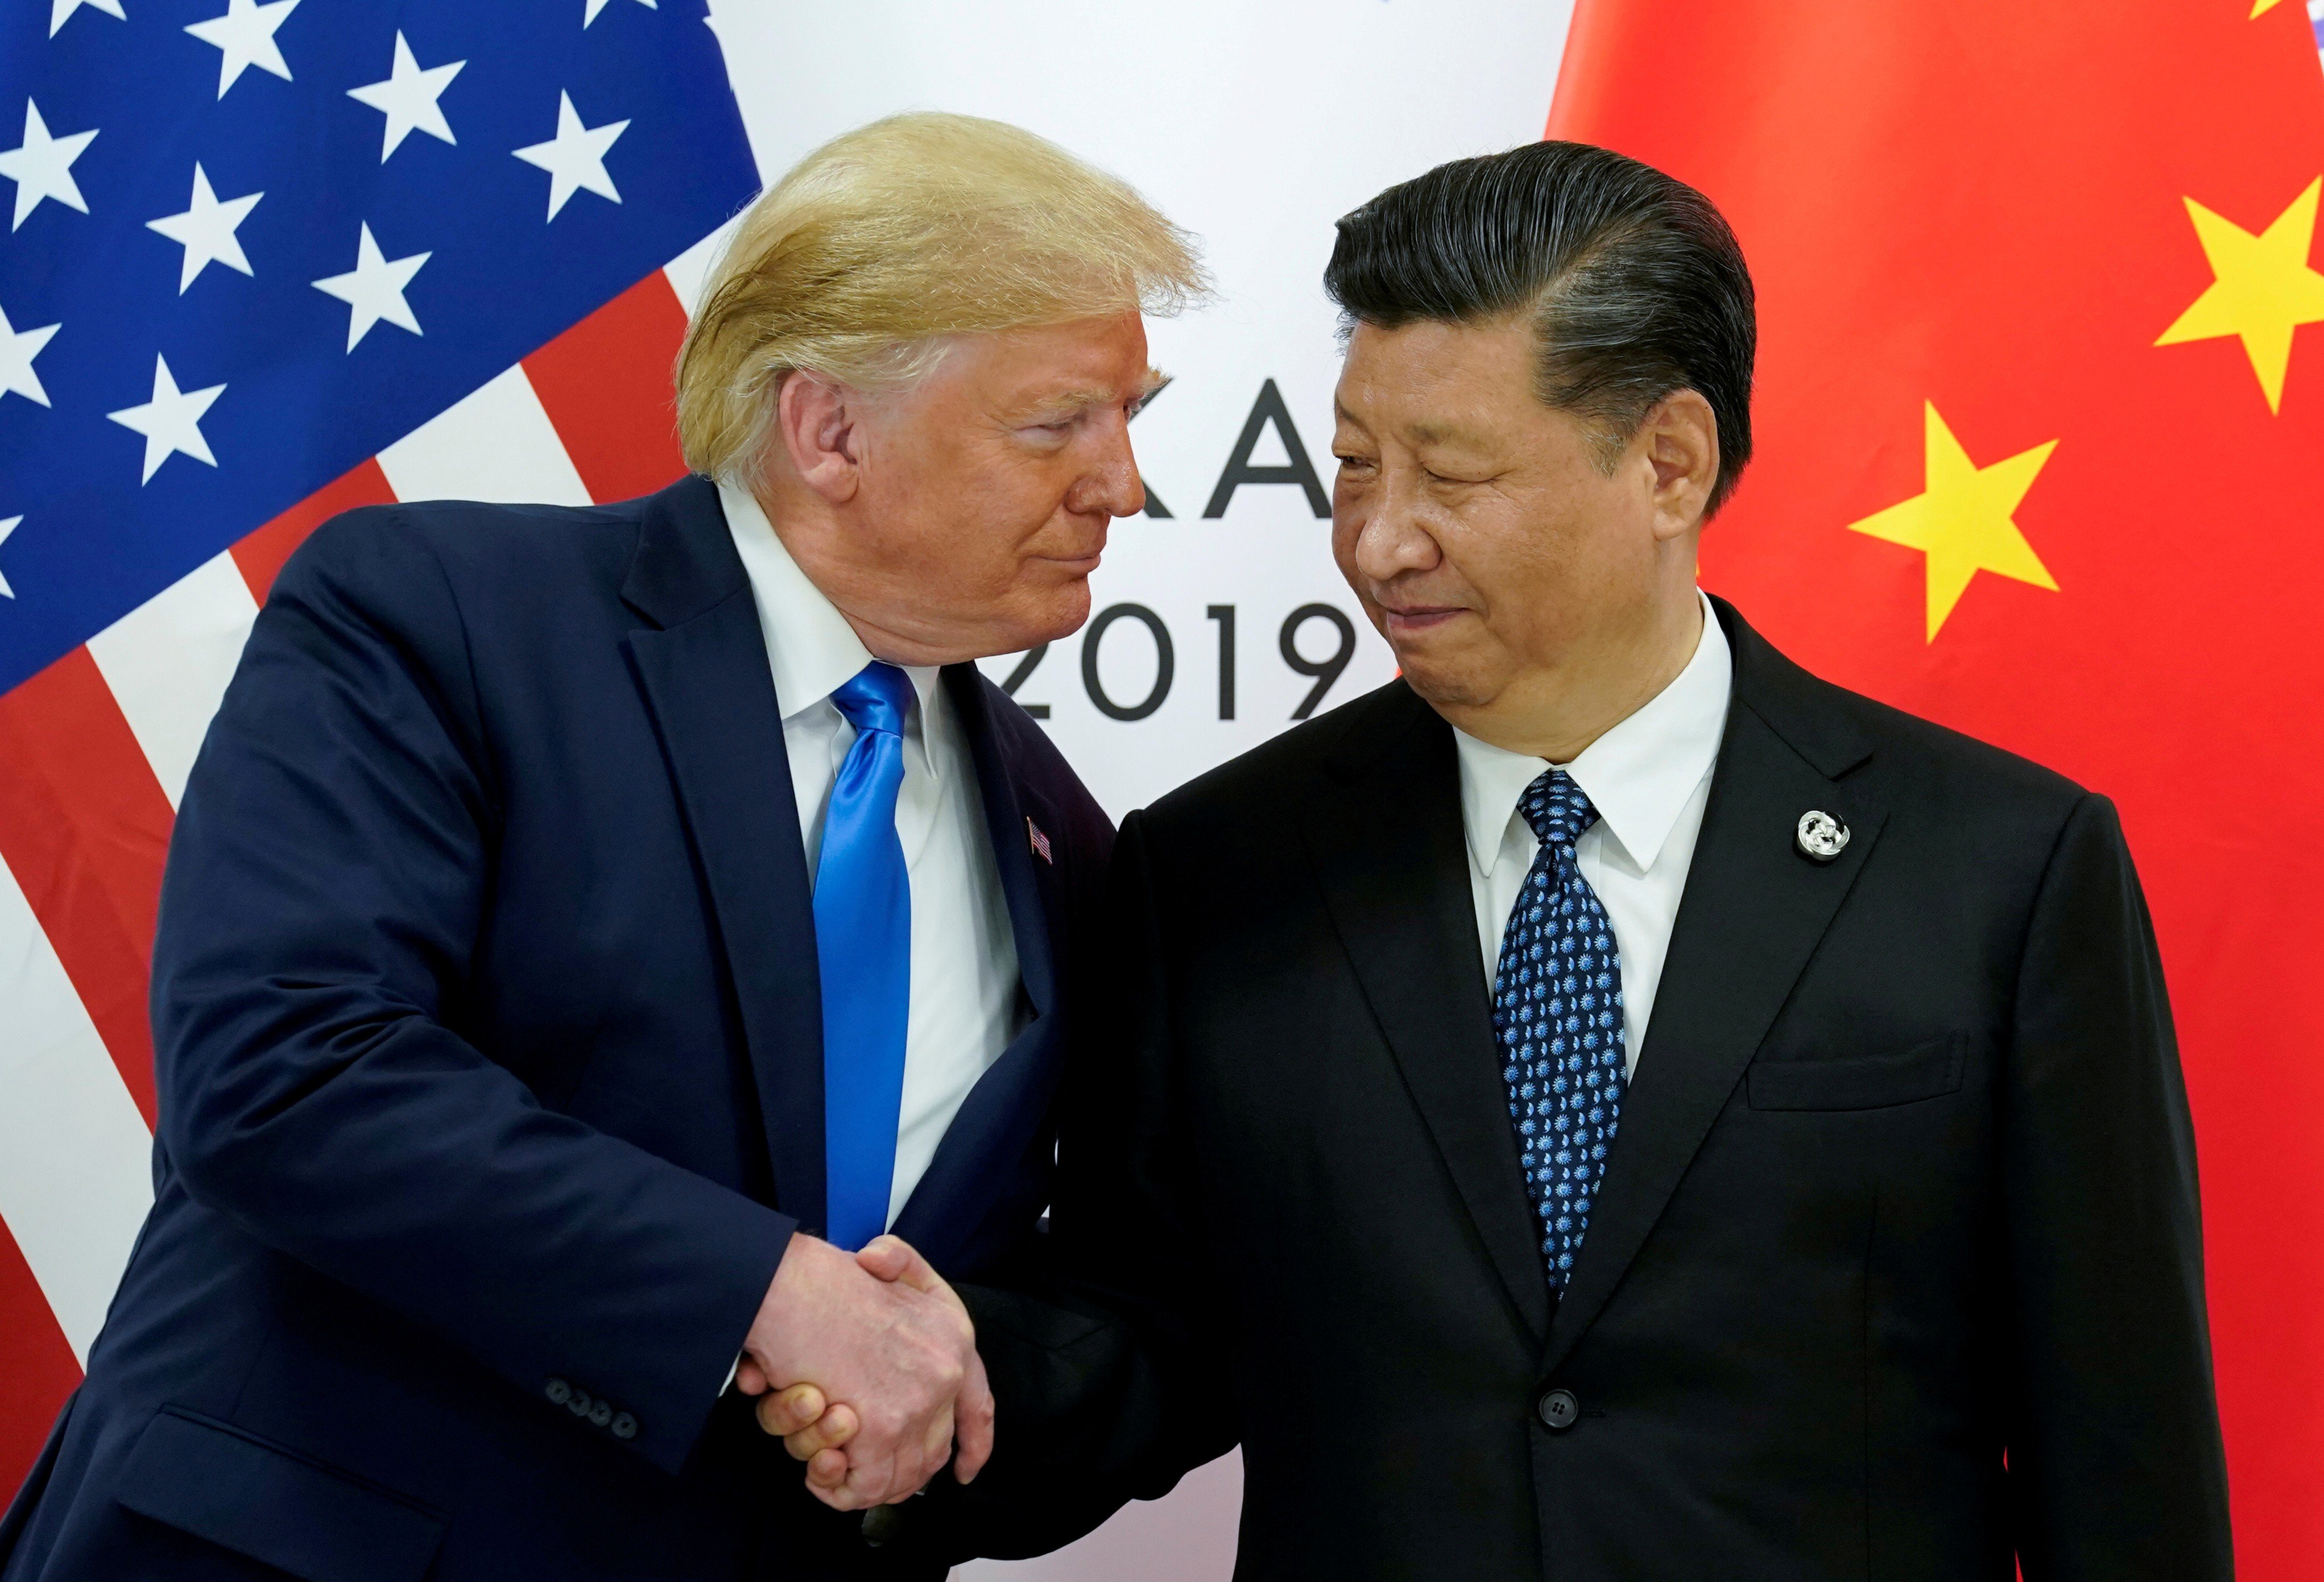 Donald Trump told people to avoid condemning China’s activities in Hong Kong on August 2. Here he meets with China’s President Xi Jinping at the G20 leaders summit in Osaka. Photo: Reuters